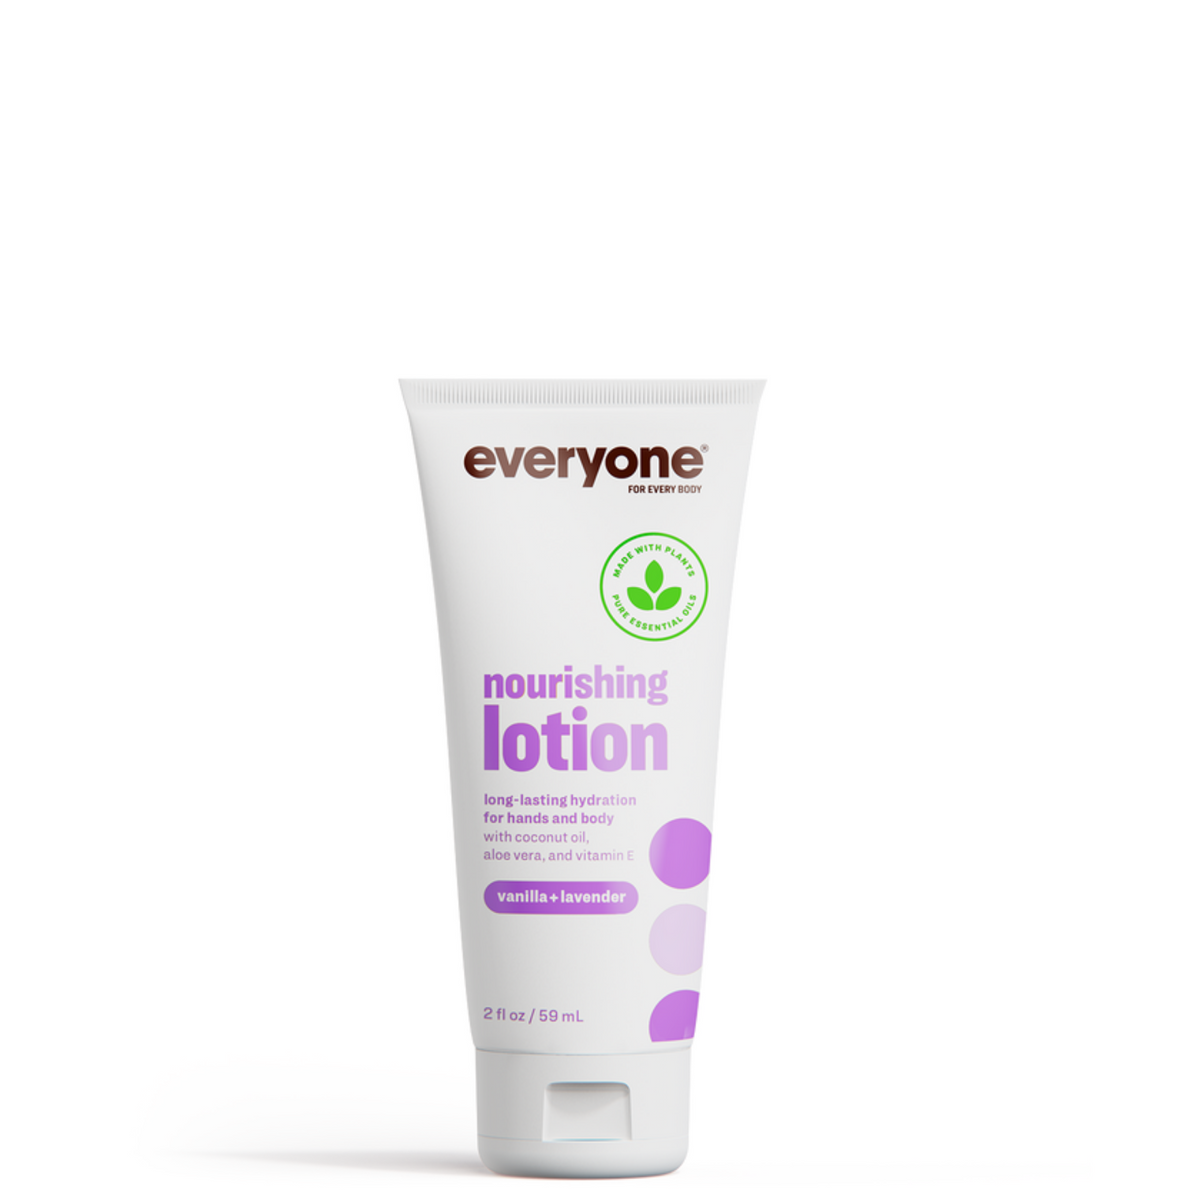 Primary Image of Vanilla and Lavender Nourishing 2 in 1 lotion